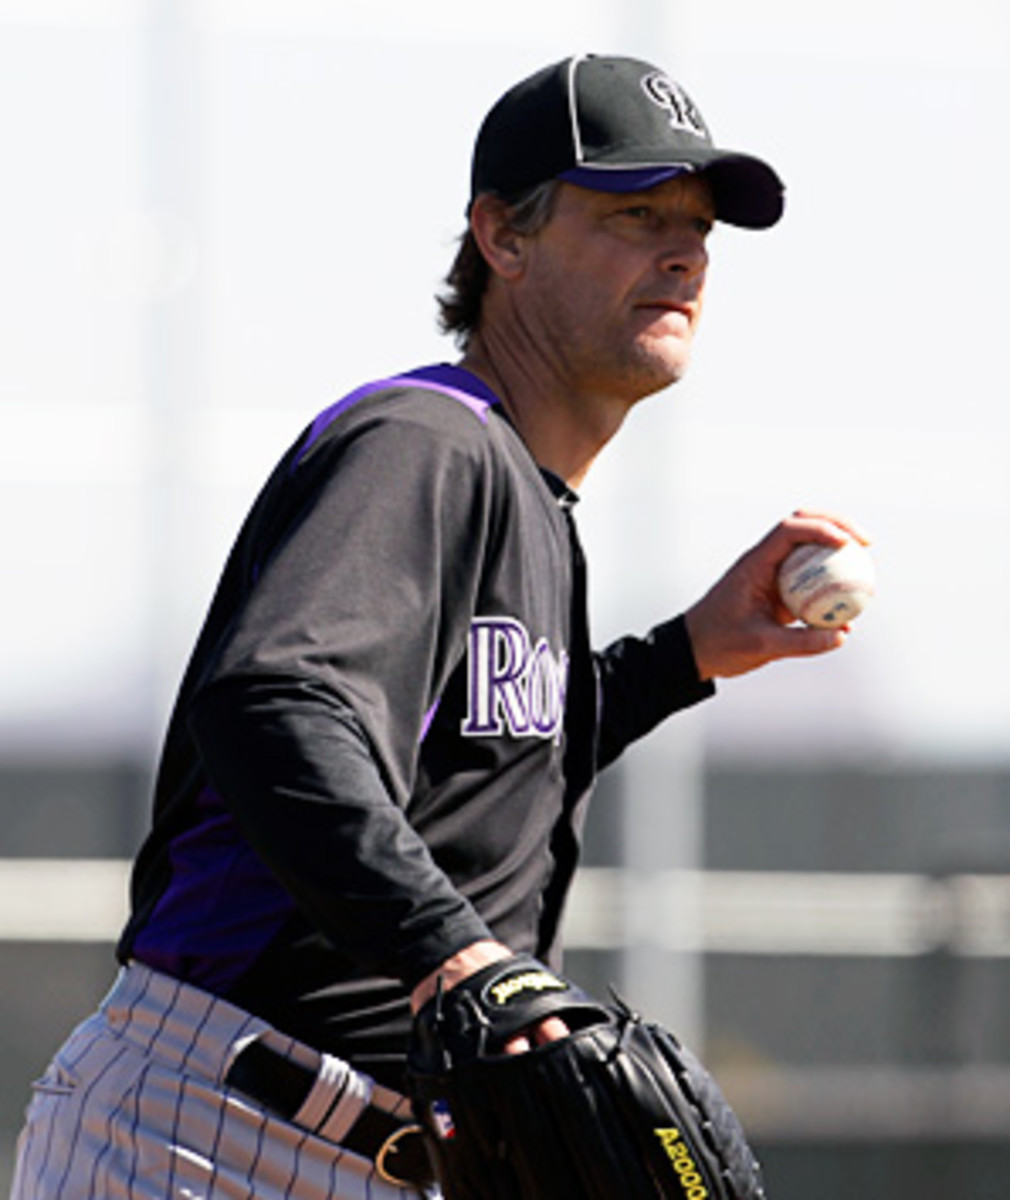 Jamie Moyer was 49 and still pitching 